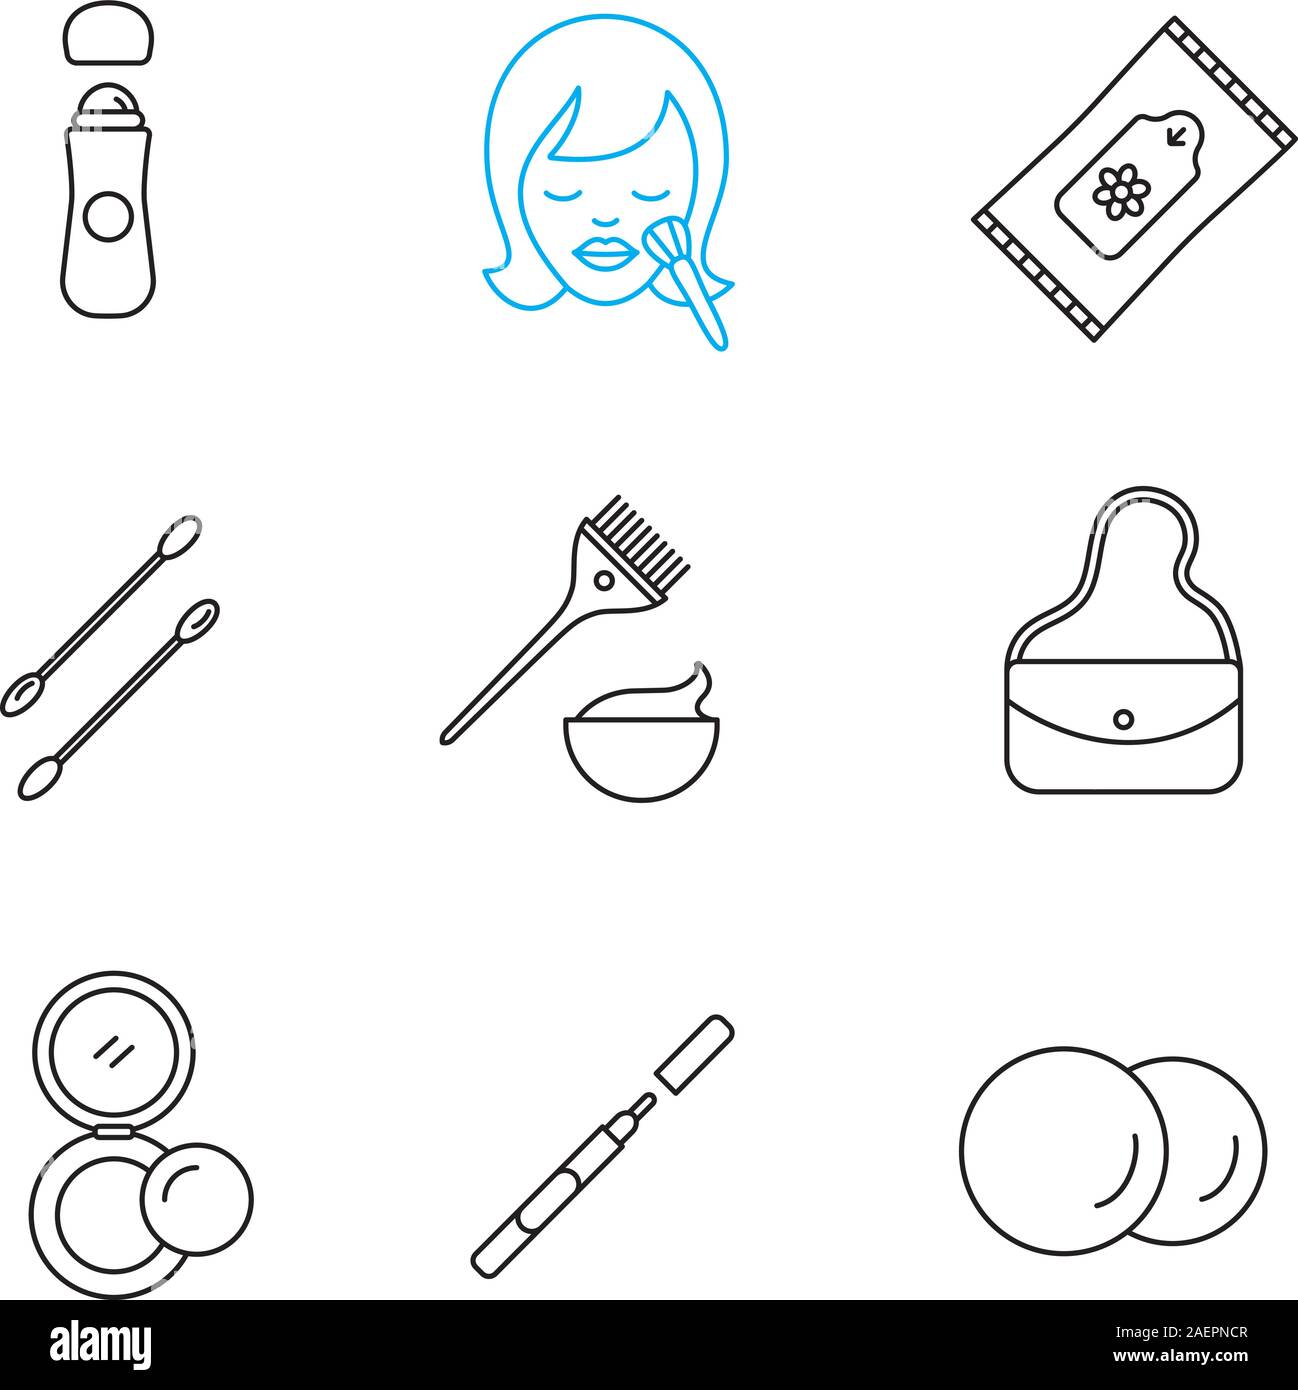 Cosmetics accessories linear icons set. Thin line contour symbols. Roll antiperspirant, wet wipes, cotton pads, earsticks, hair dyeing kit, purse, rou Stock Vector